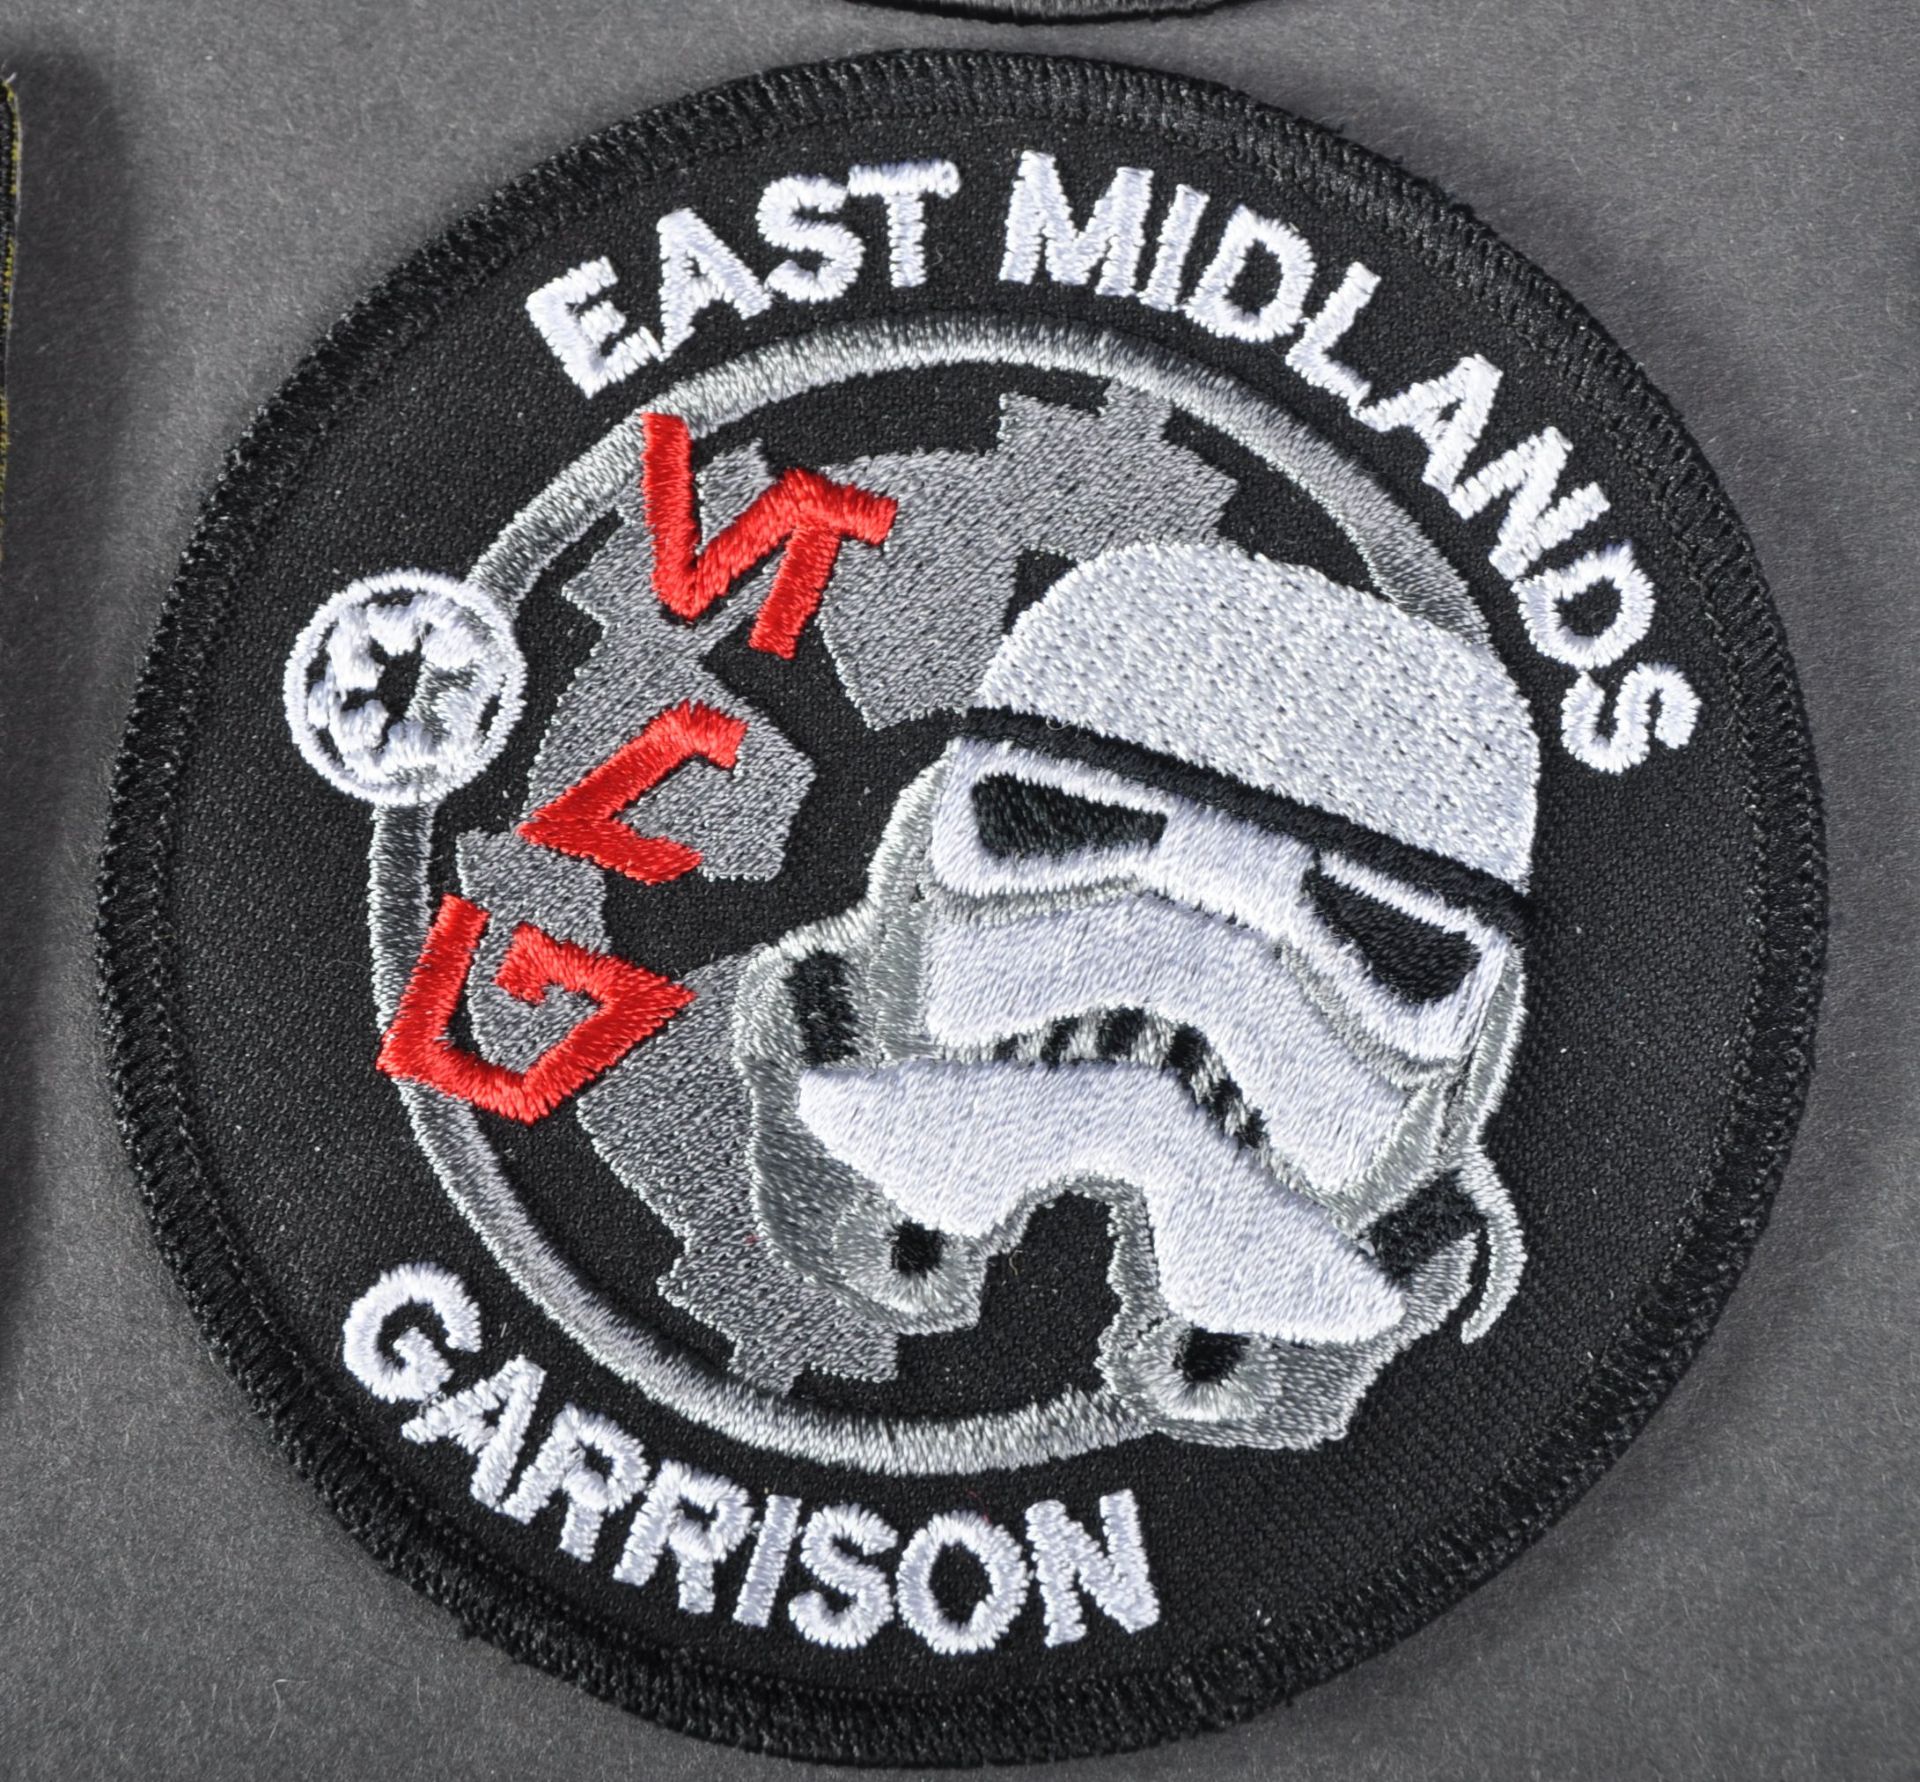 ESTATE OF JEREMY BULLOCH - STAR WARS - CLOTH PATCHES - Image 6 of 8